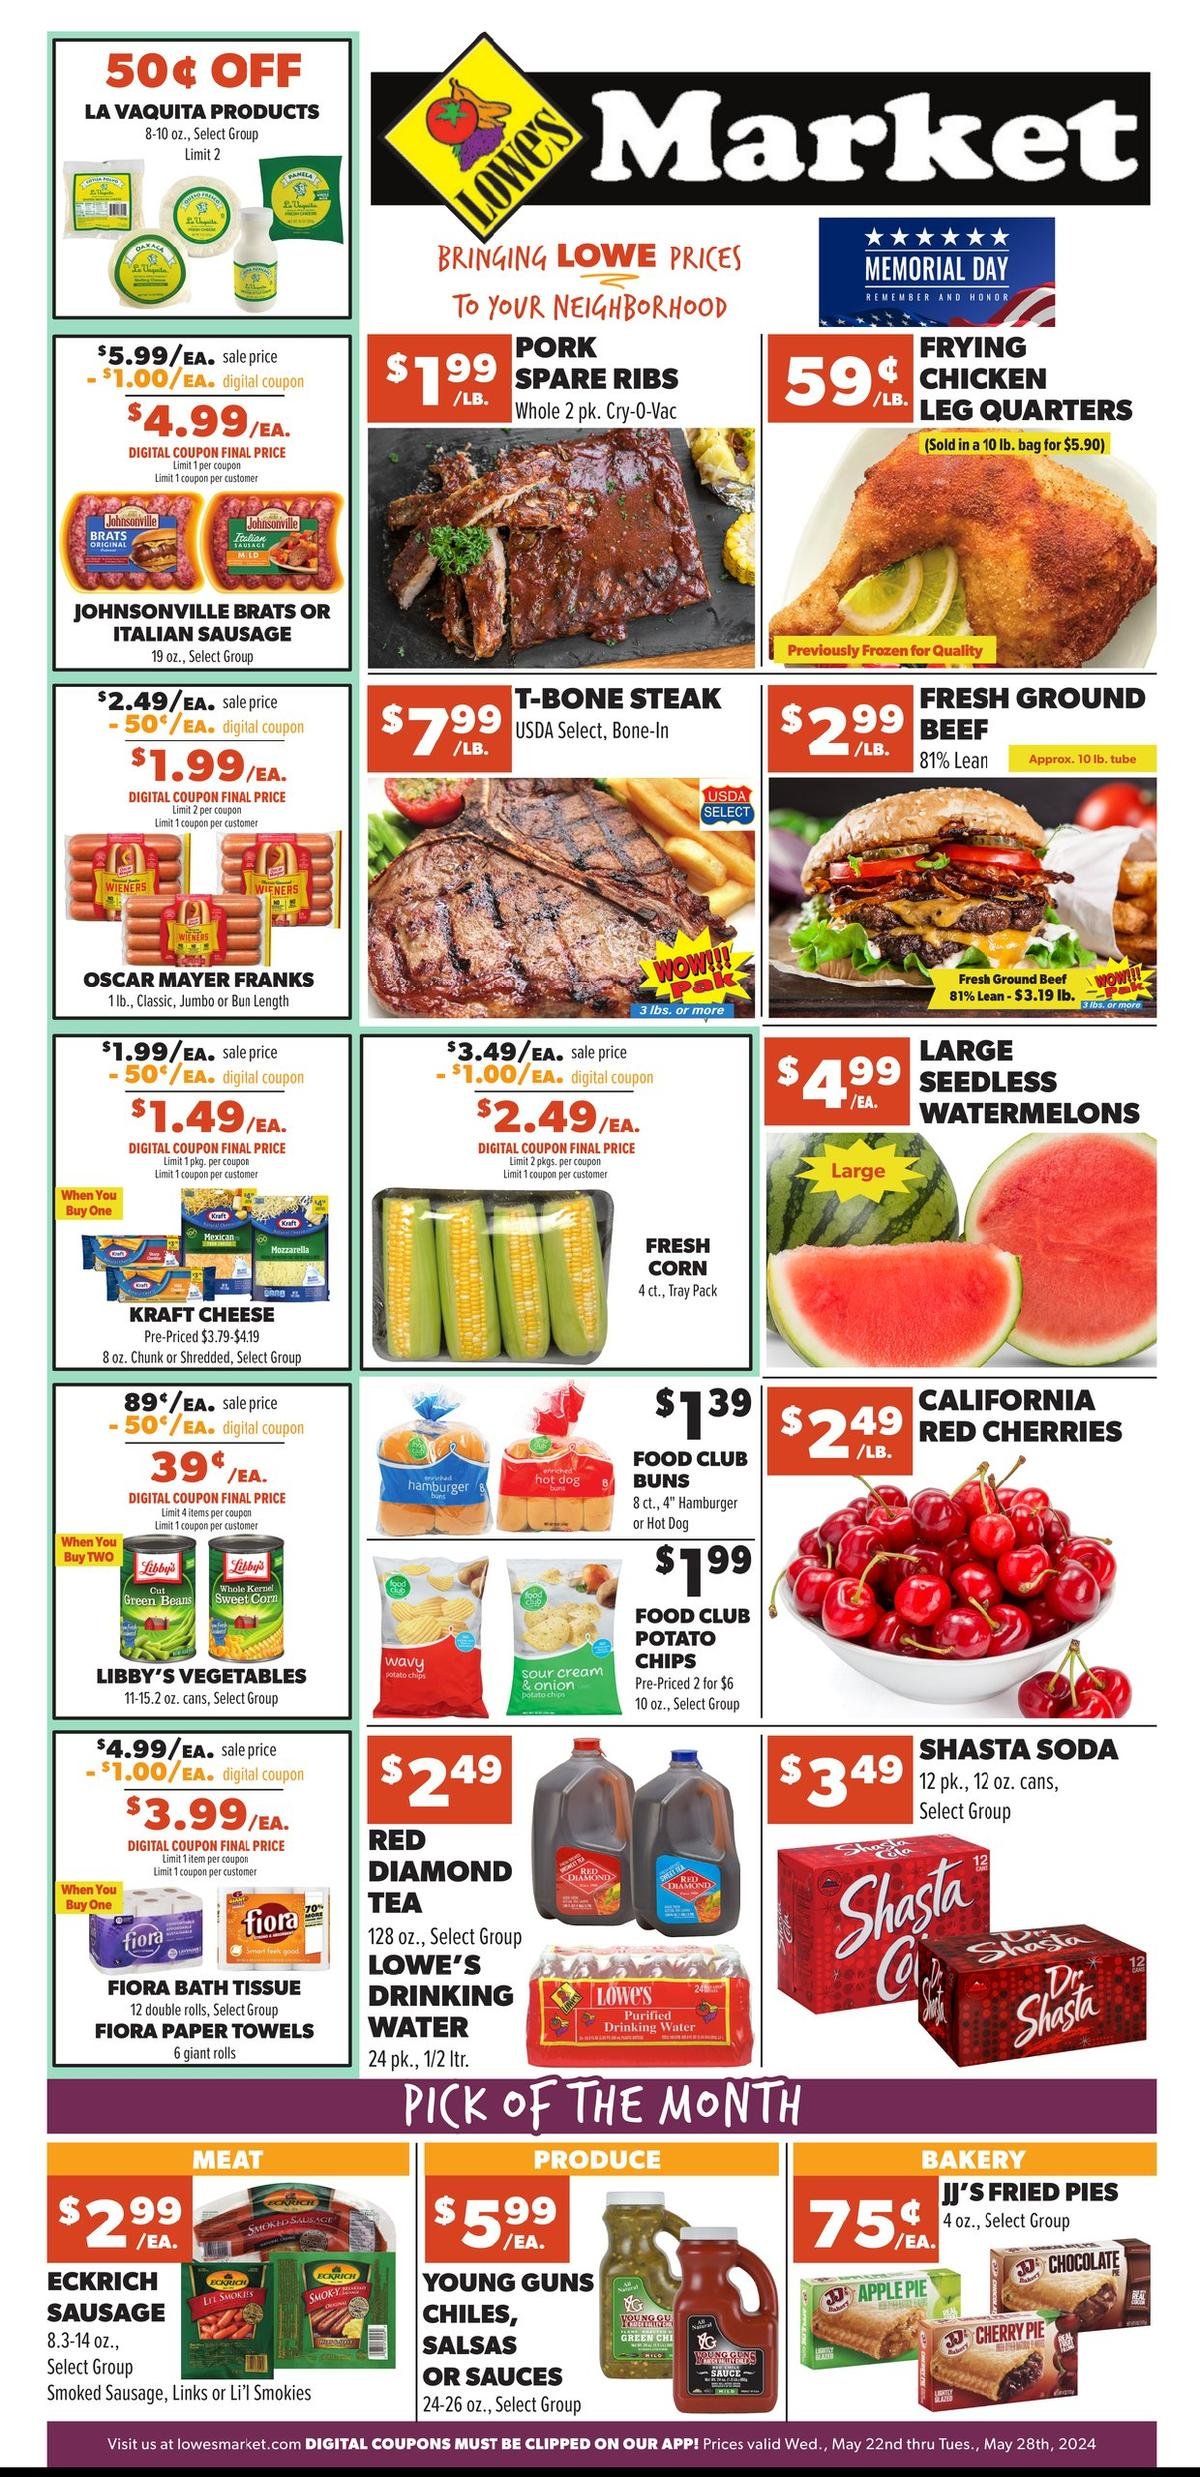 Lowe's Market weekly ad - page 1